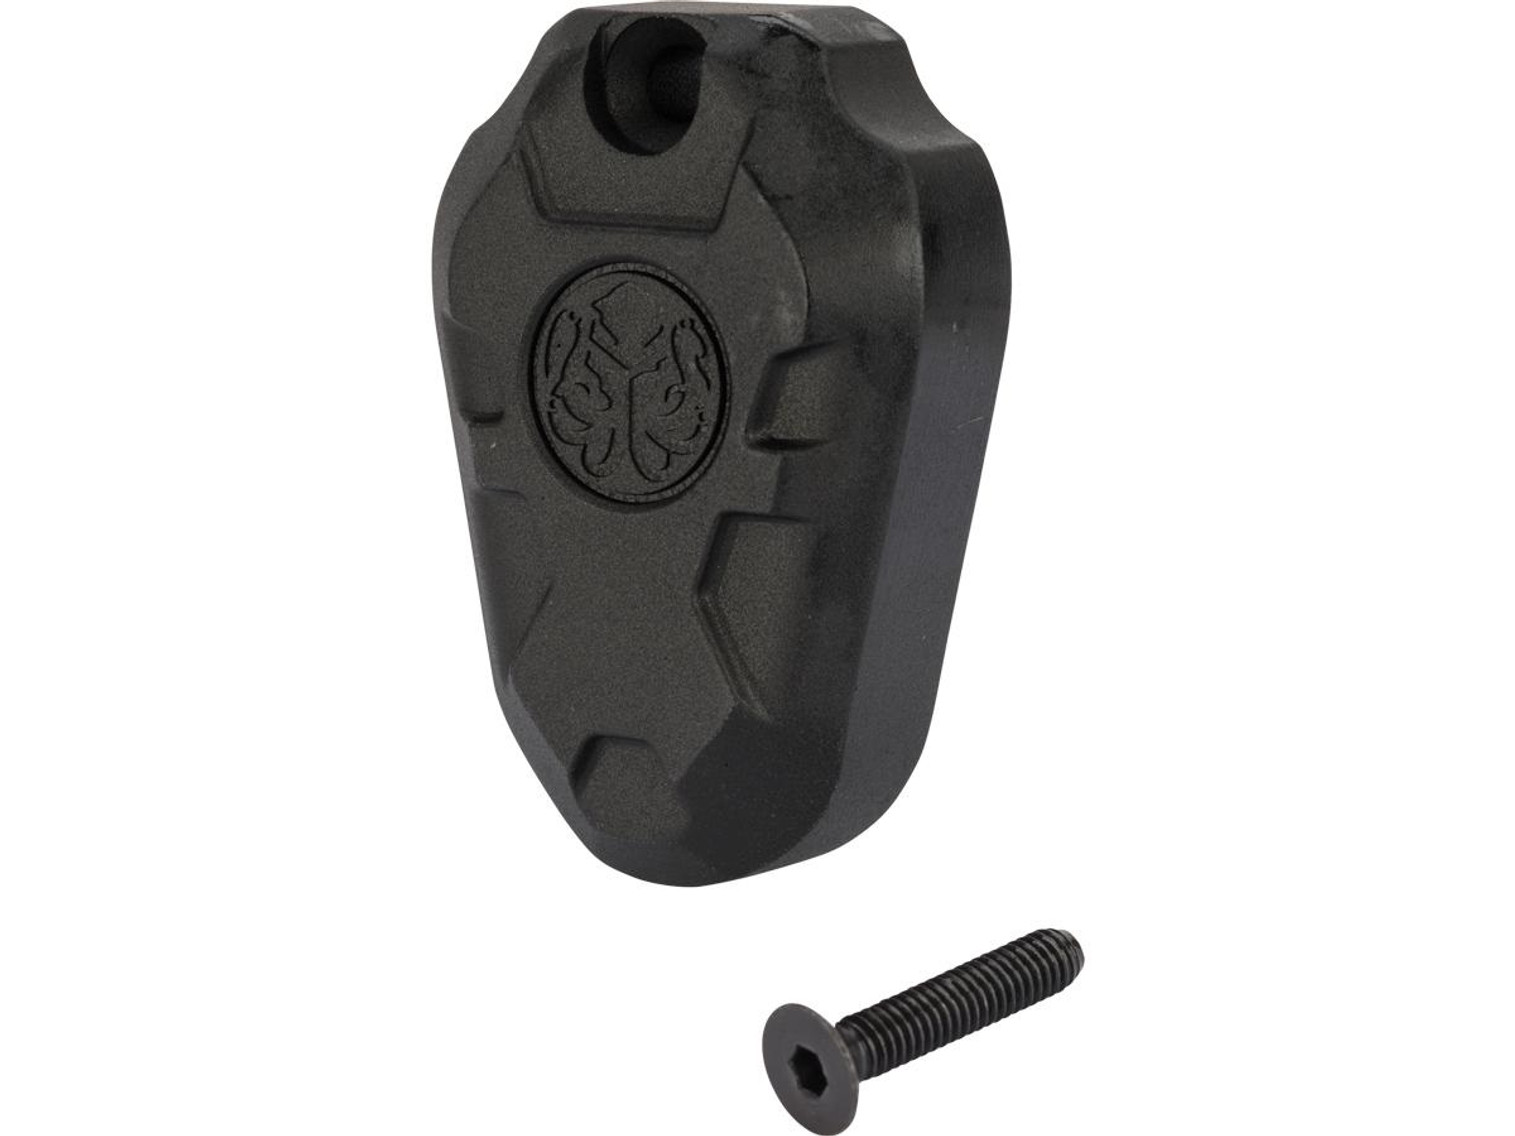 KRYTAC Airsoft KRISS Vector Compact Carbine Stock End Cap & Screw
